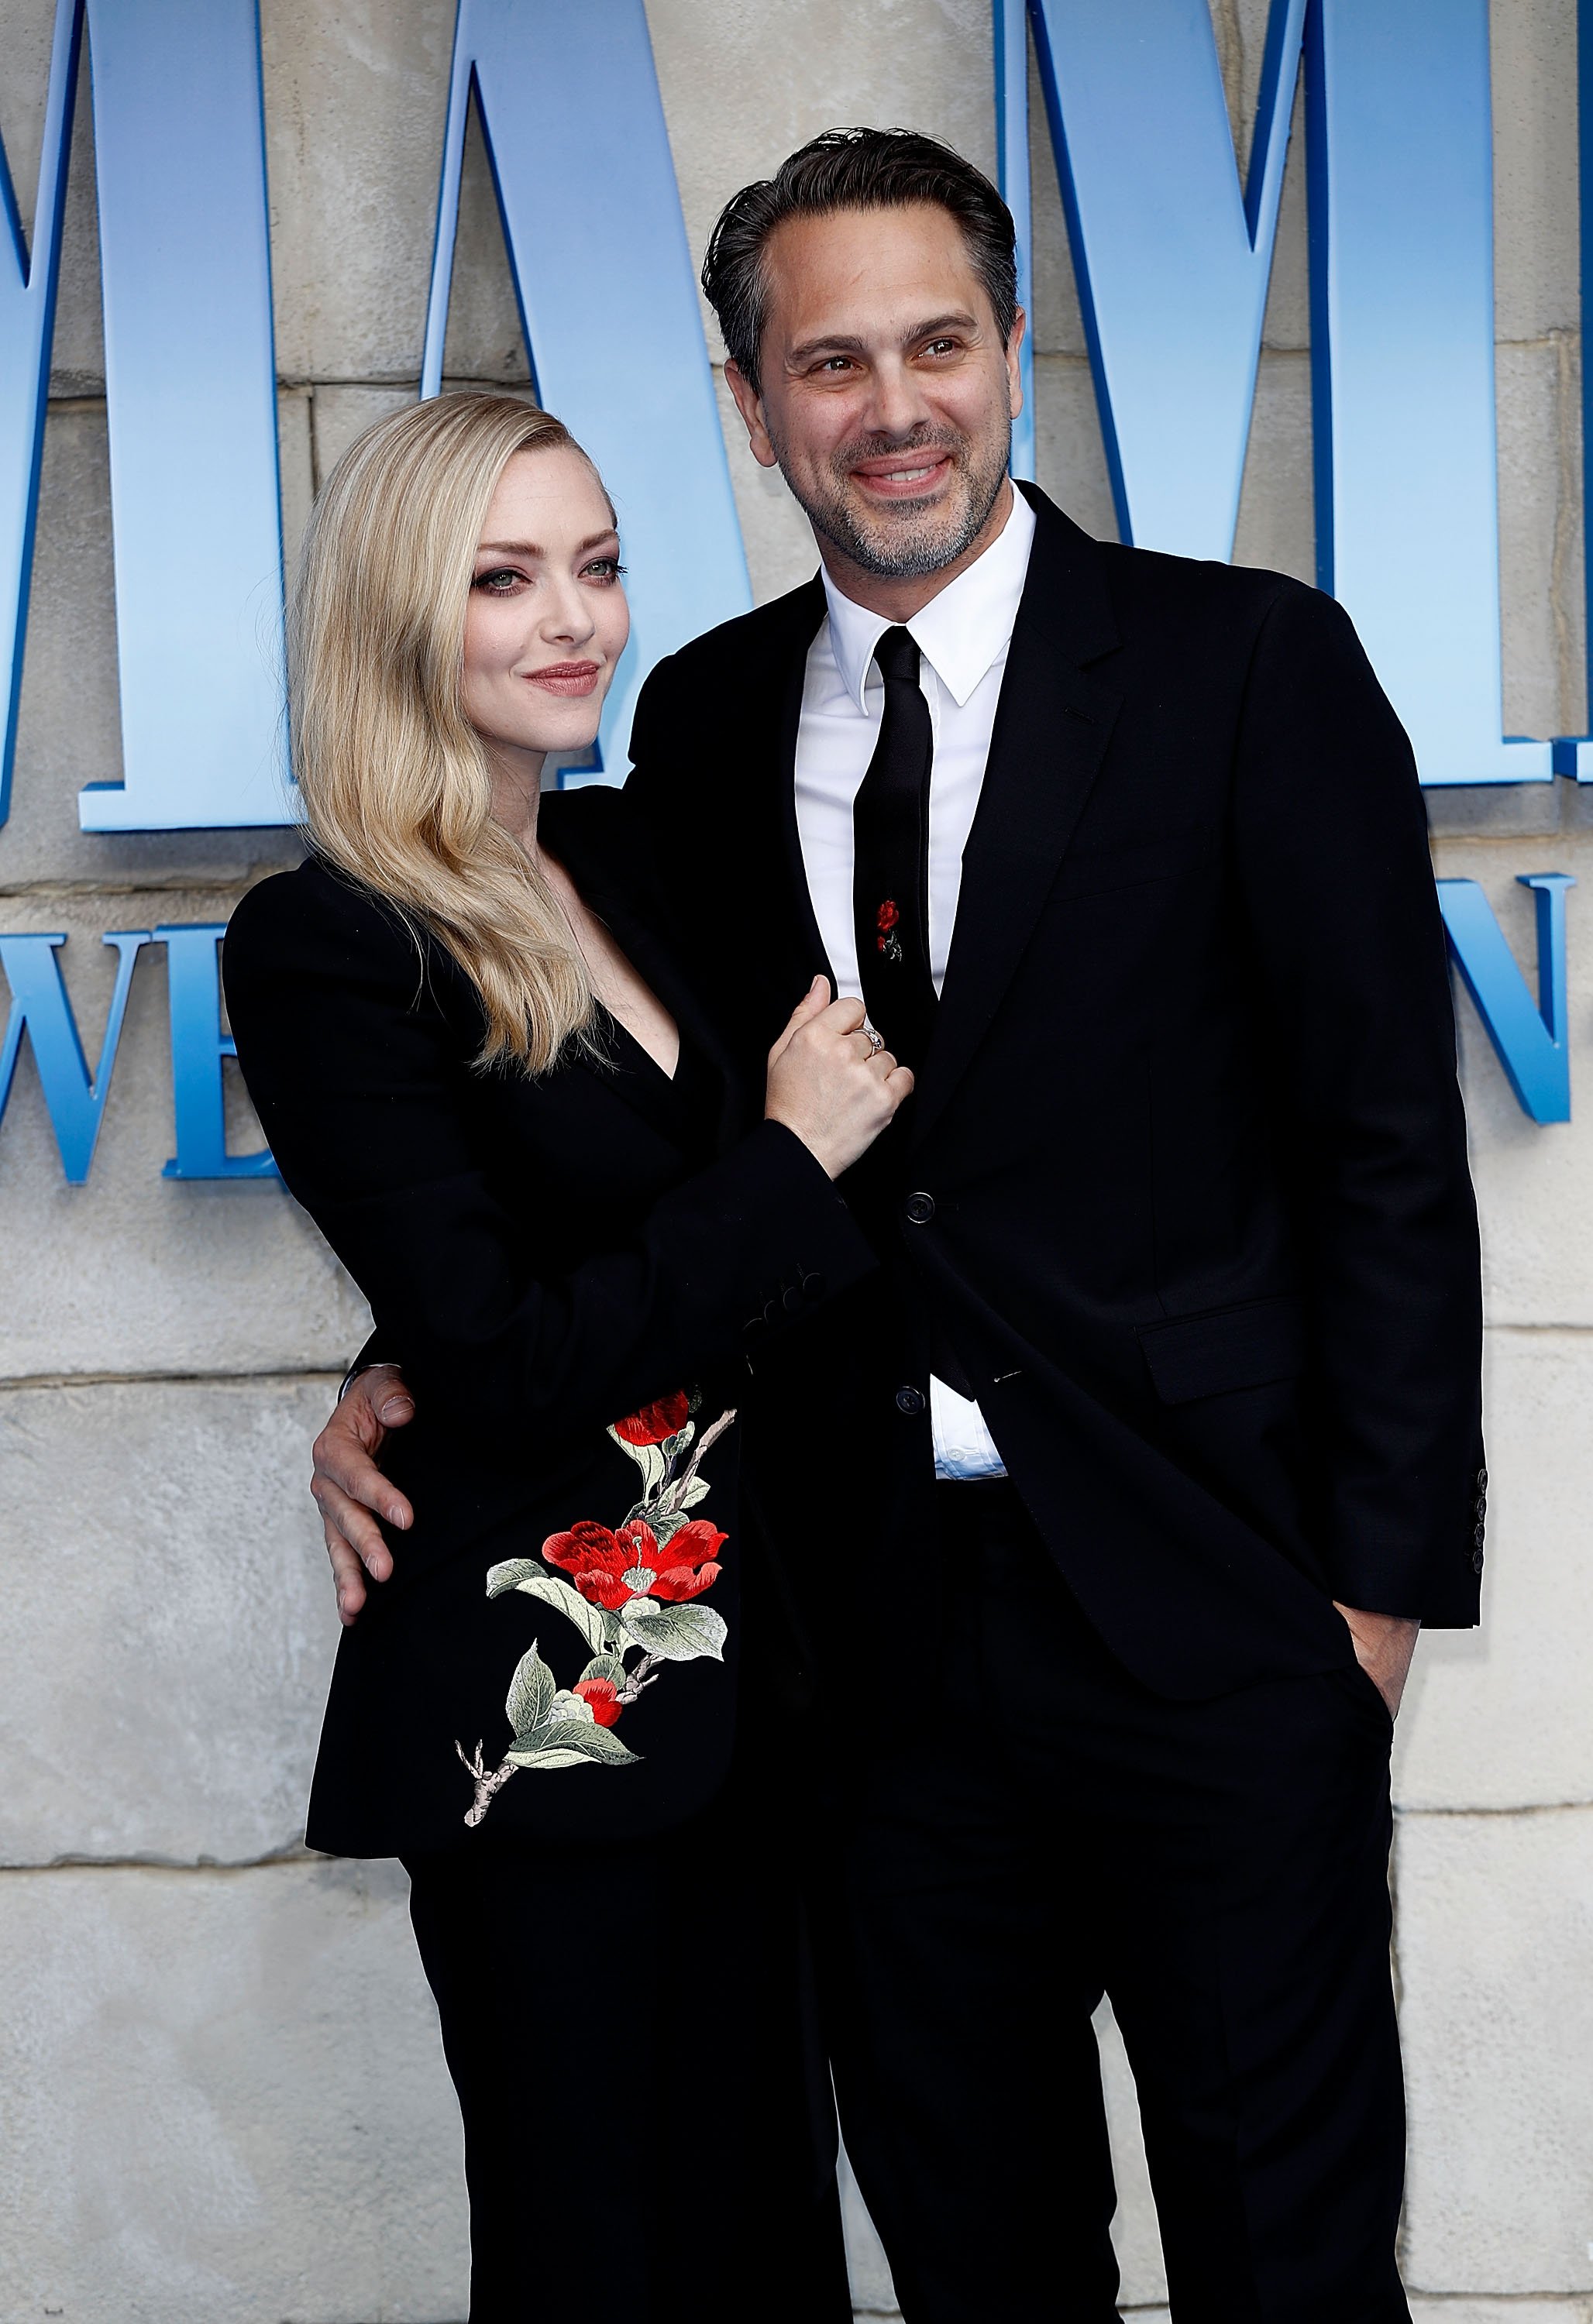 Amanda Seyfried and Thomas Sadoski attend the "Mamma Mia! Here We Go Again" premiere on July 16, 2018, in London, England. | Source: Getty Images